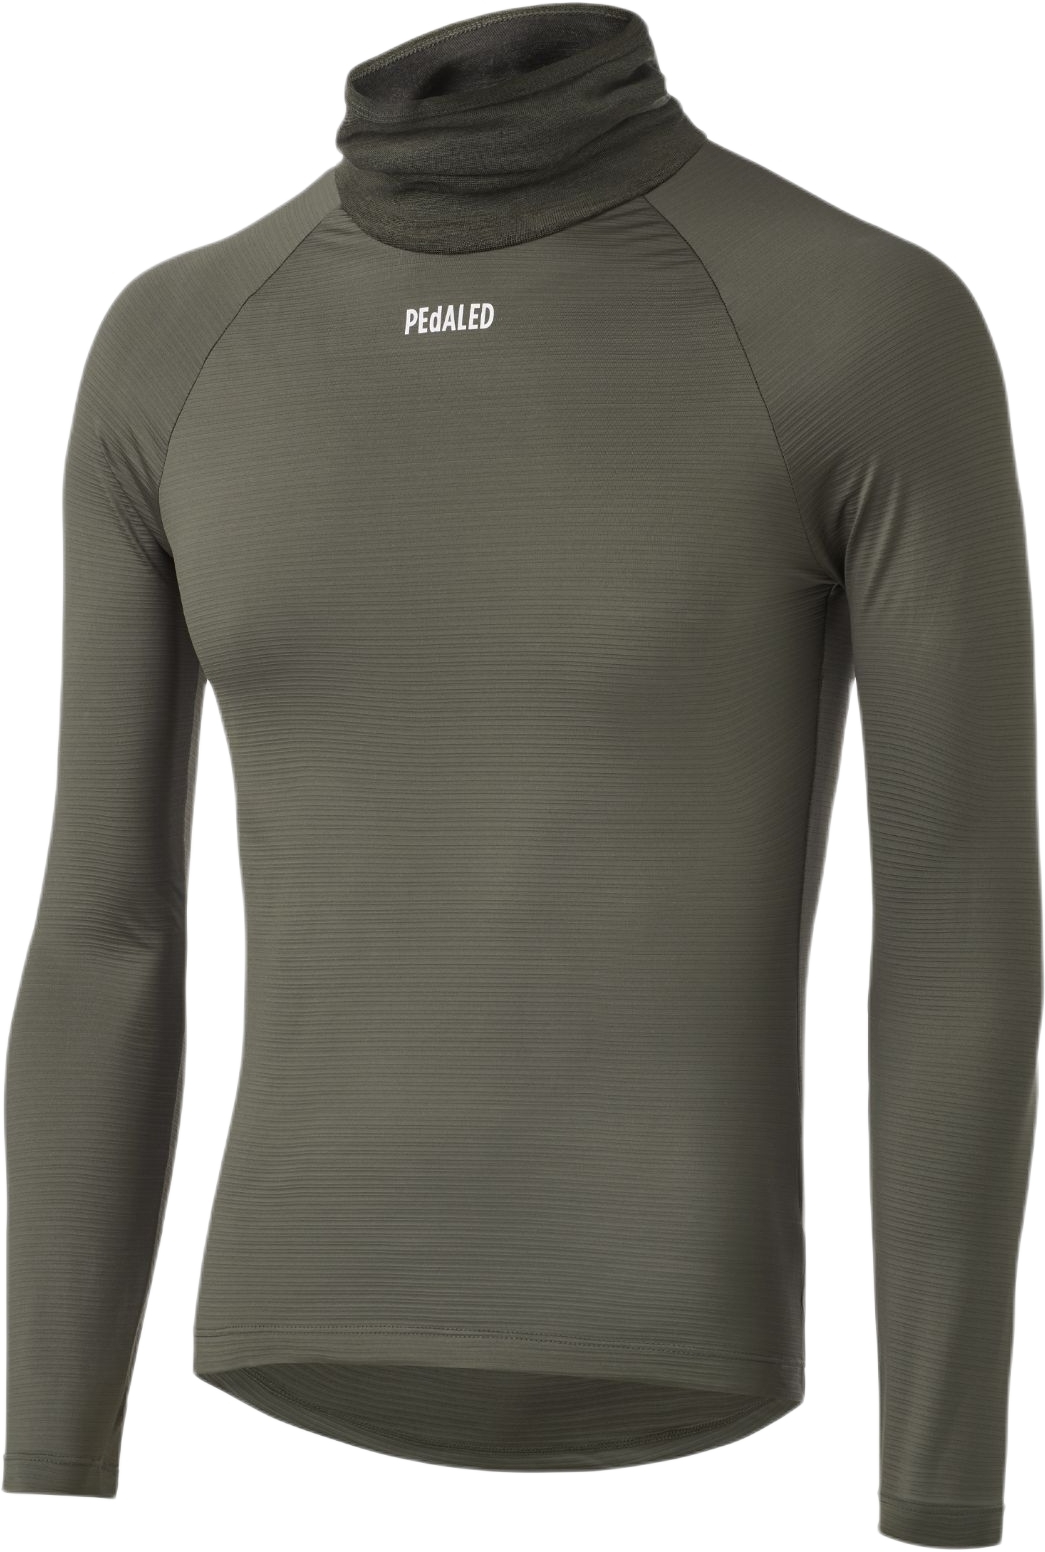 E-shop PEdALED Essential Thermo Longsleeve Base Layer - Grey Ink L